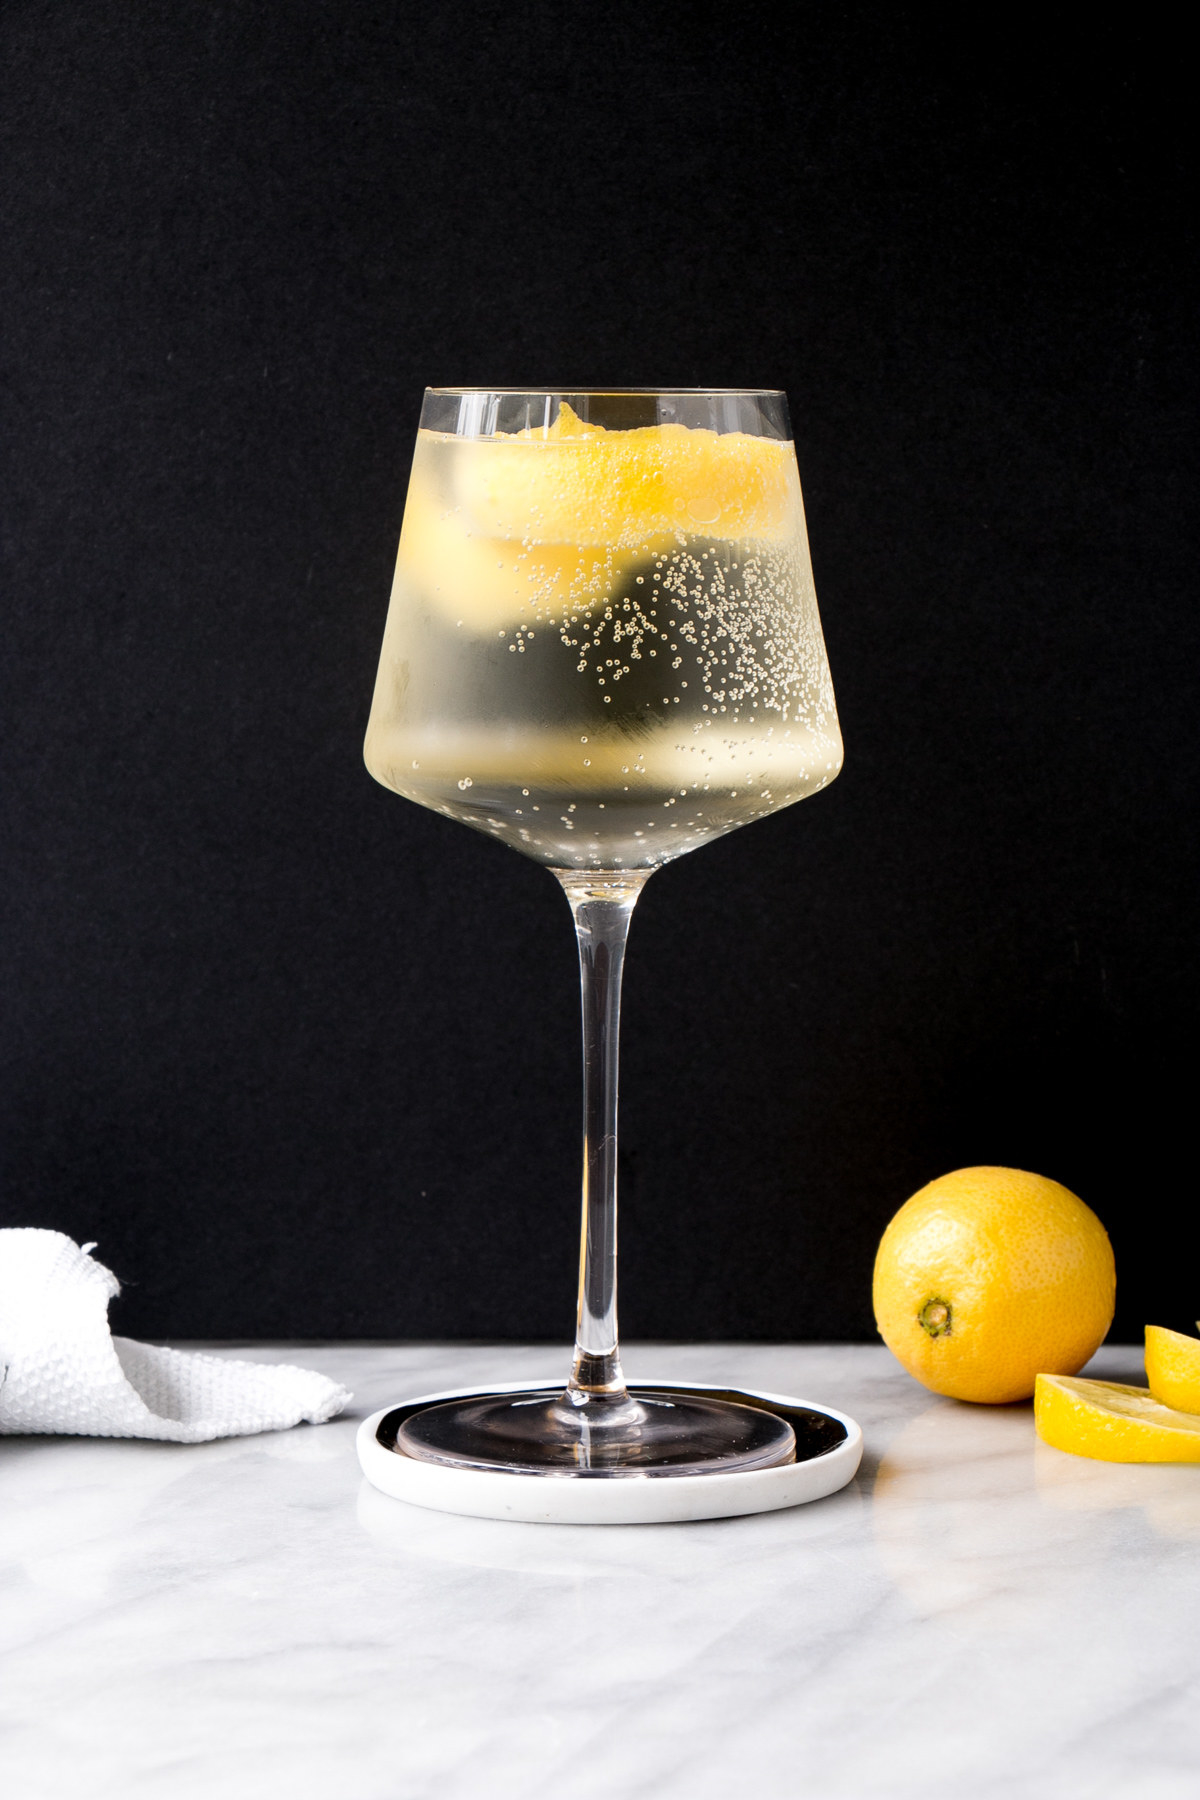 White wine spritzer in a wine glass garnished with lemon peel.